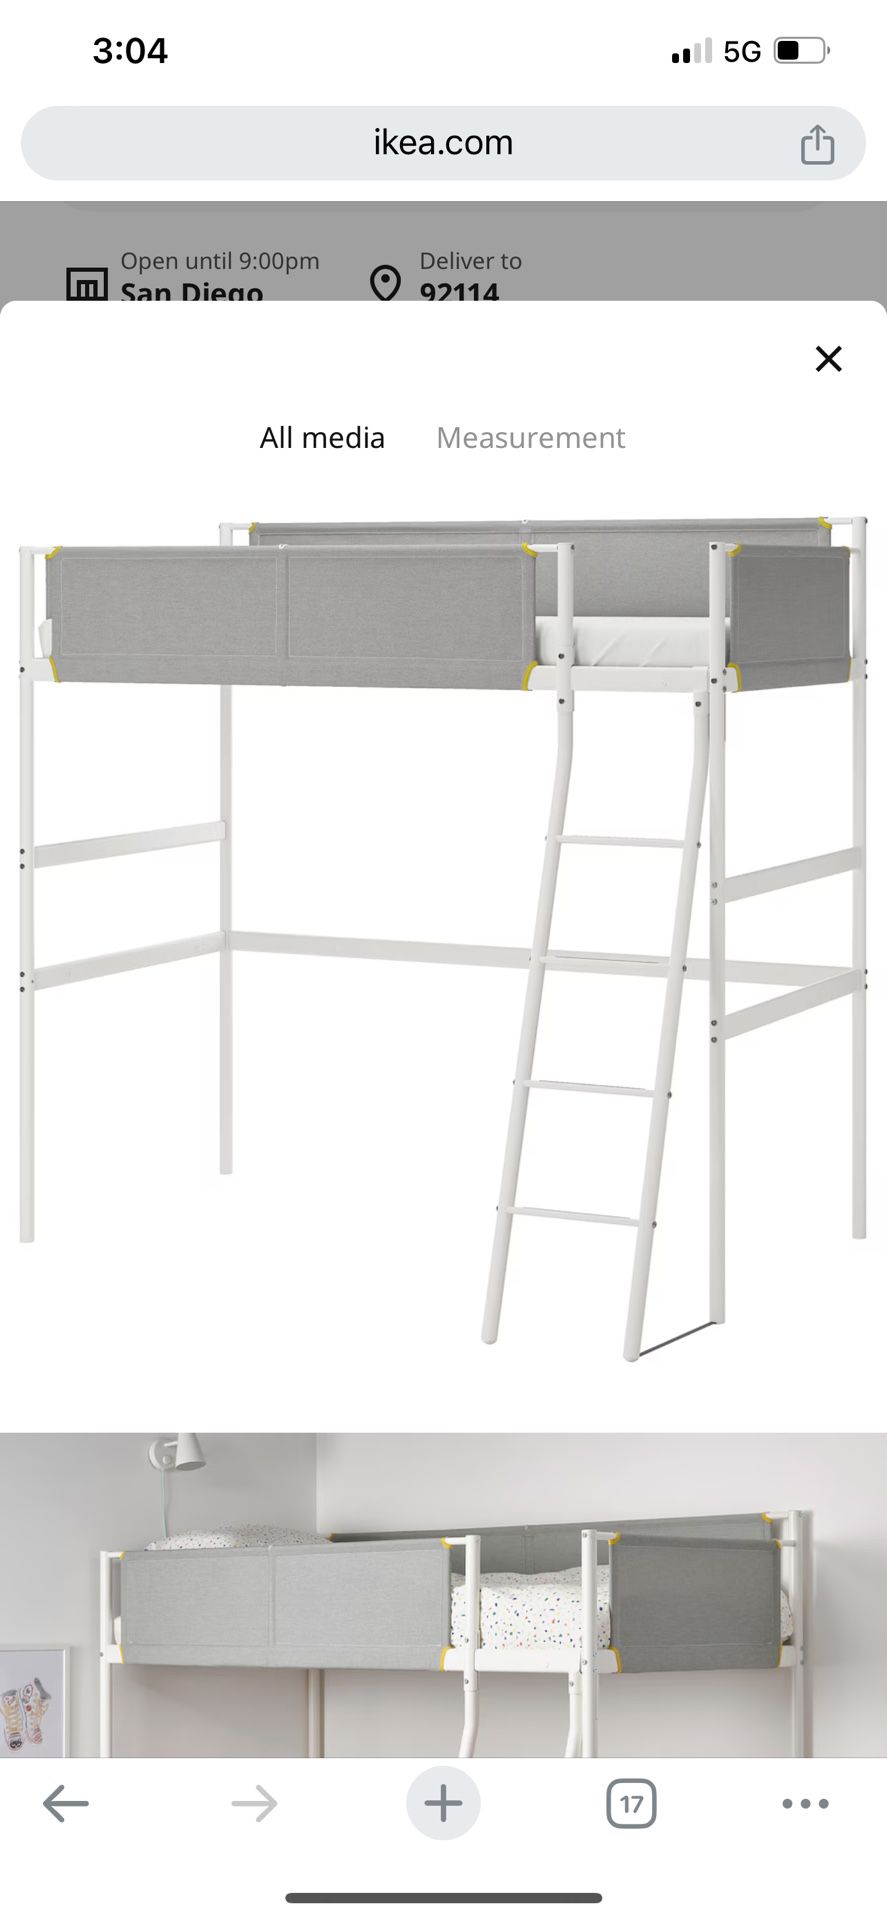 Twin Size Bunk Bed Frame and Mattress 